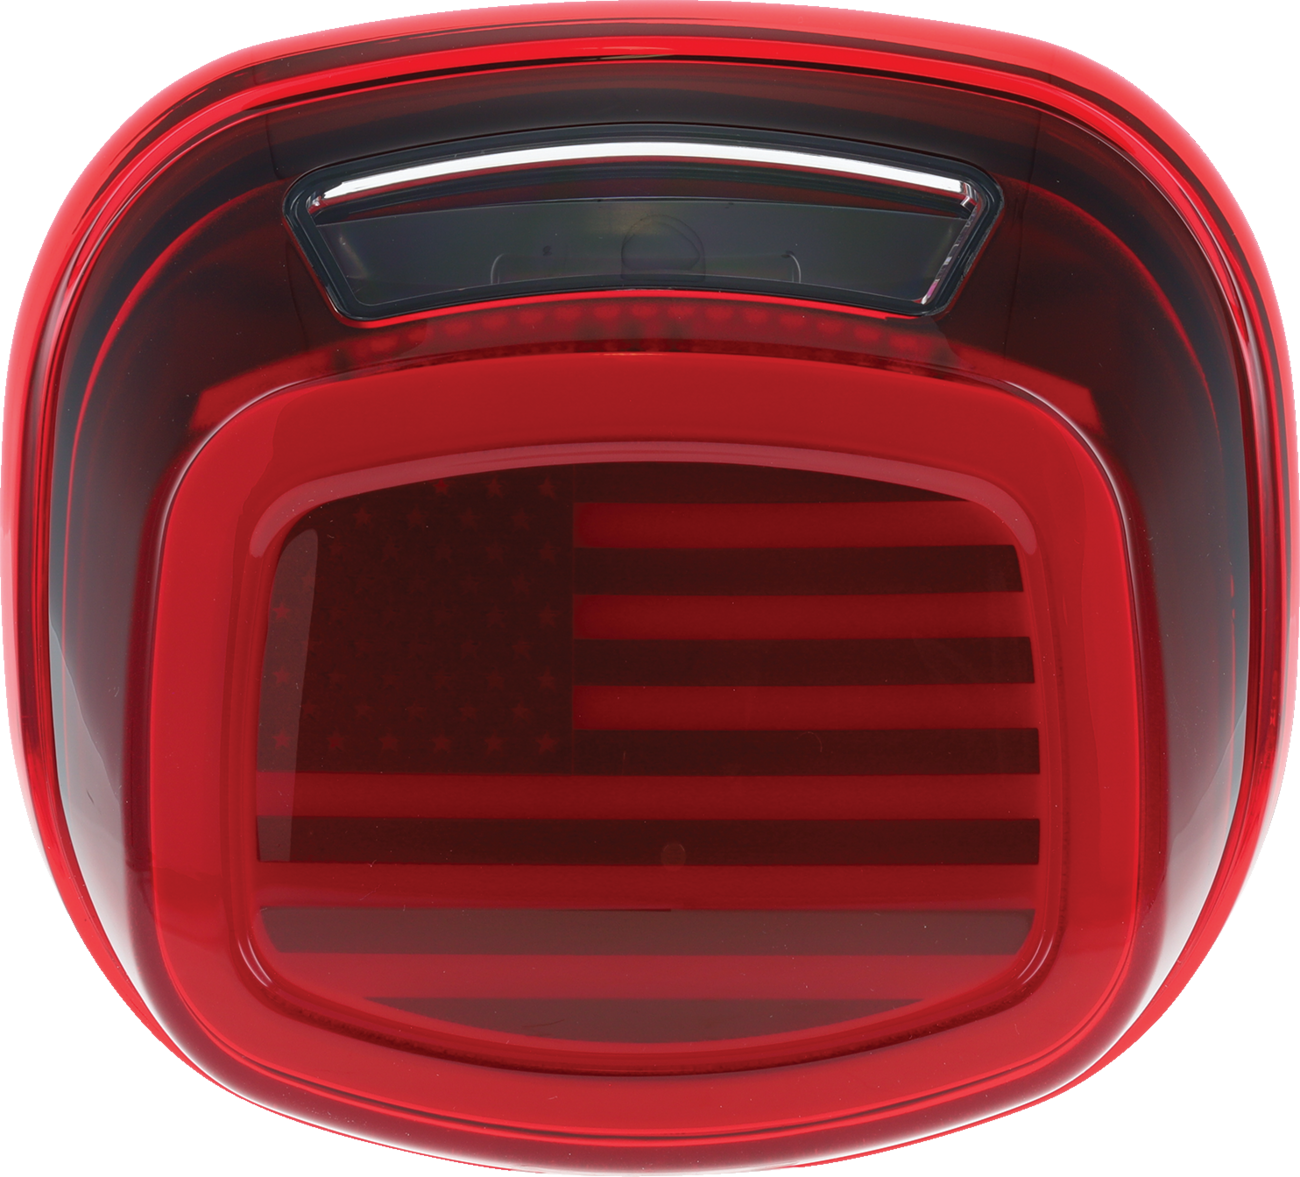 Kuryakyn LED Red Tracer Flag Taillight fits 1999-2022 Harley Touring Softail XL